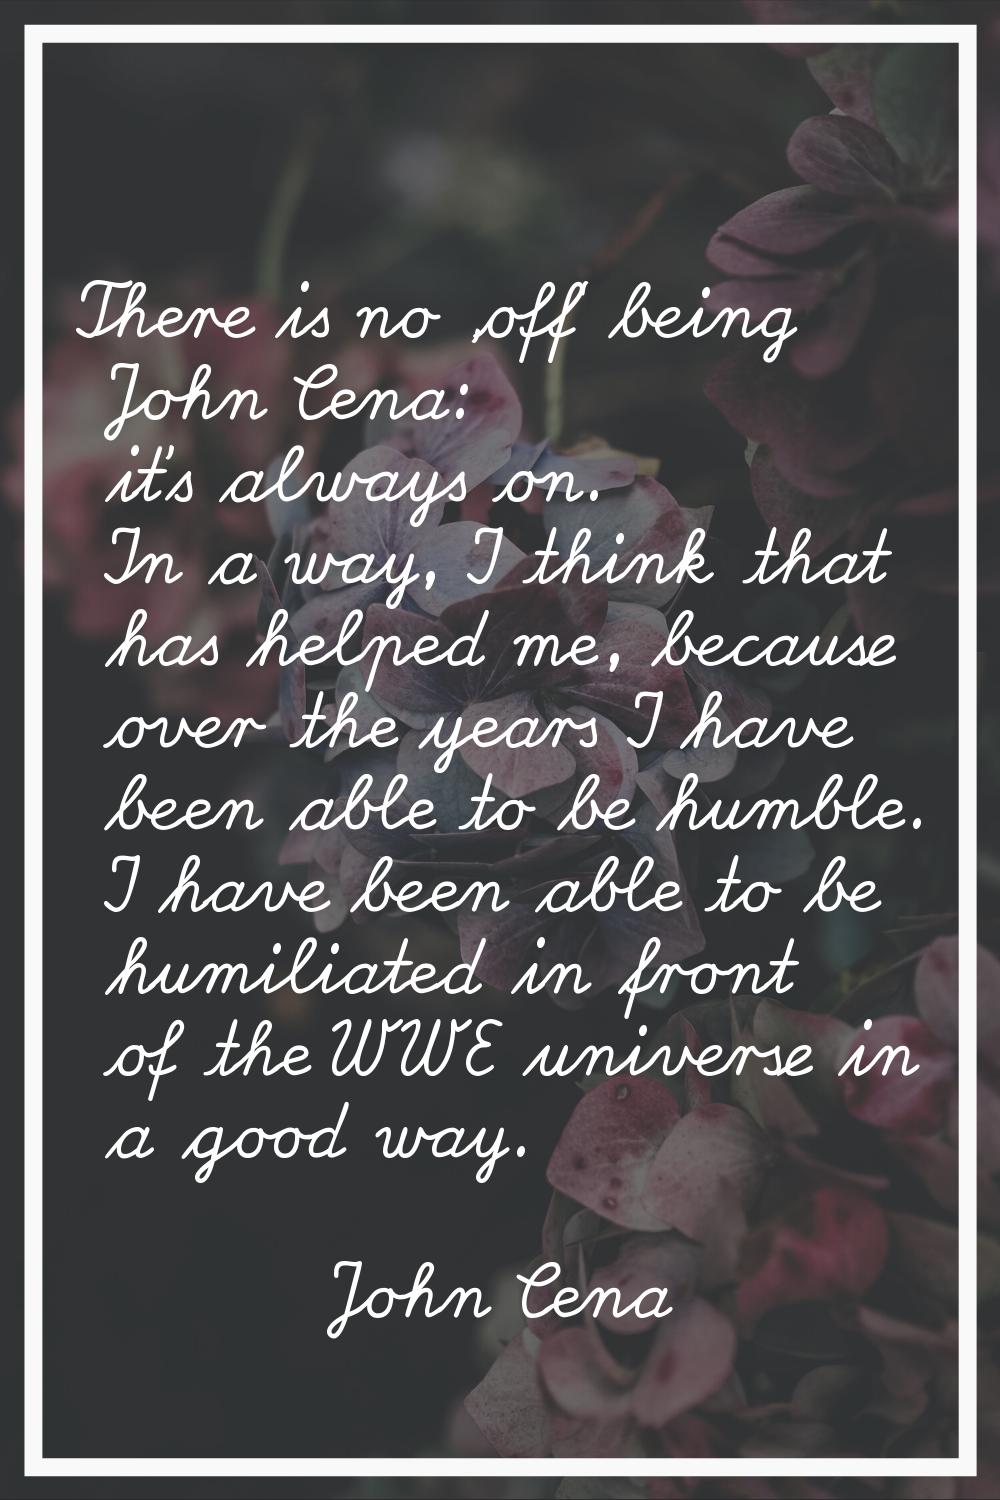 There is no 'off' being John Cena: it's always on. In a way, I think that has helped me, because ov